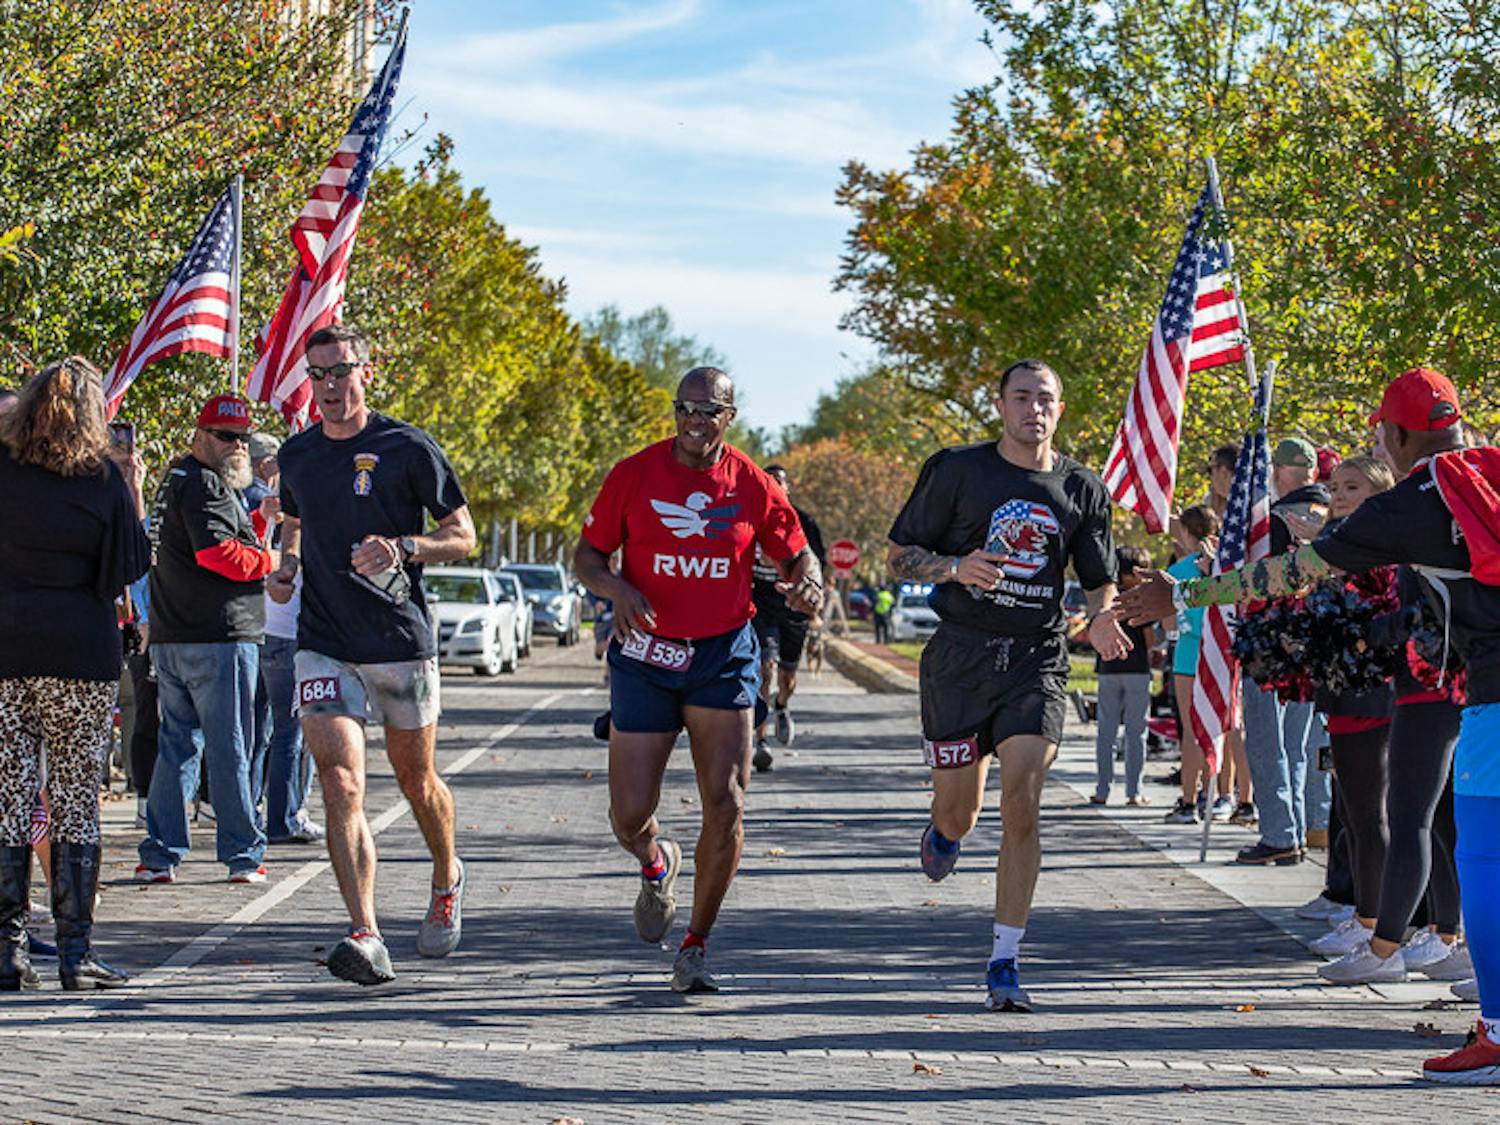 Lieutenant Colonel Daniel Hayes (on left), Command Sergeant Major Philson Tavernier, (center), and Staff Sergeant Juan Vallellanes (on right), from U.S. Army Training Center Fort Jackson, run to the finish line together during the USC Veterans 5K on Nov. 13, 2022. The annual 5K honors veterans, service members, and their families. The 5K has raised over $50,000 for The Big Red Barn Retreat, which offers therapeutic programs and services for veterans, active duty service members, and first responders.